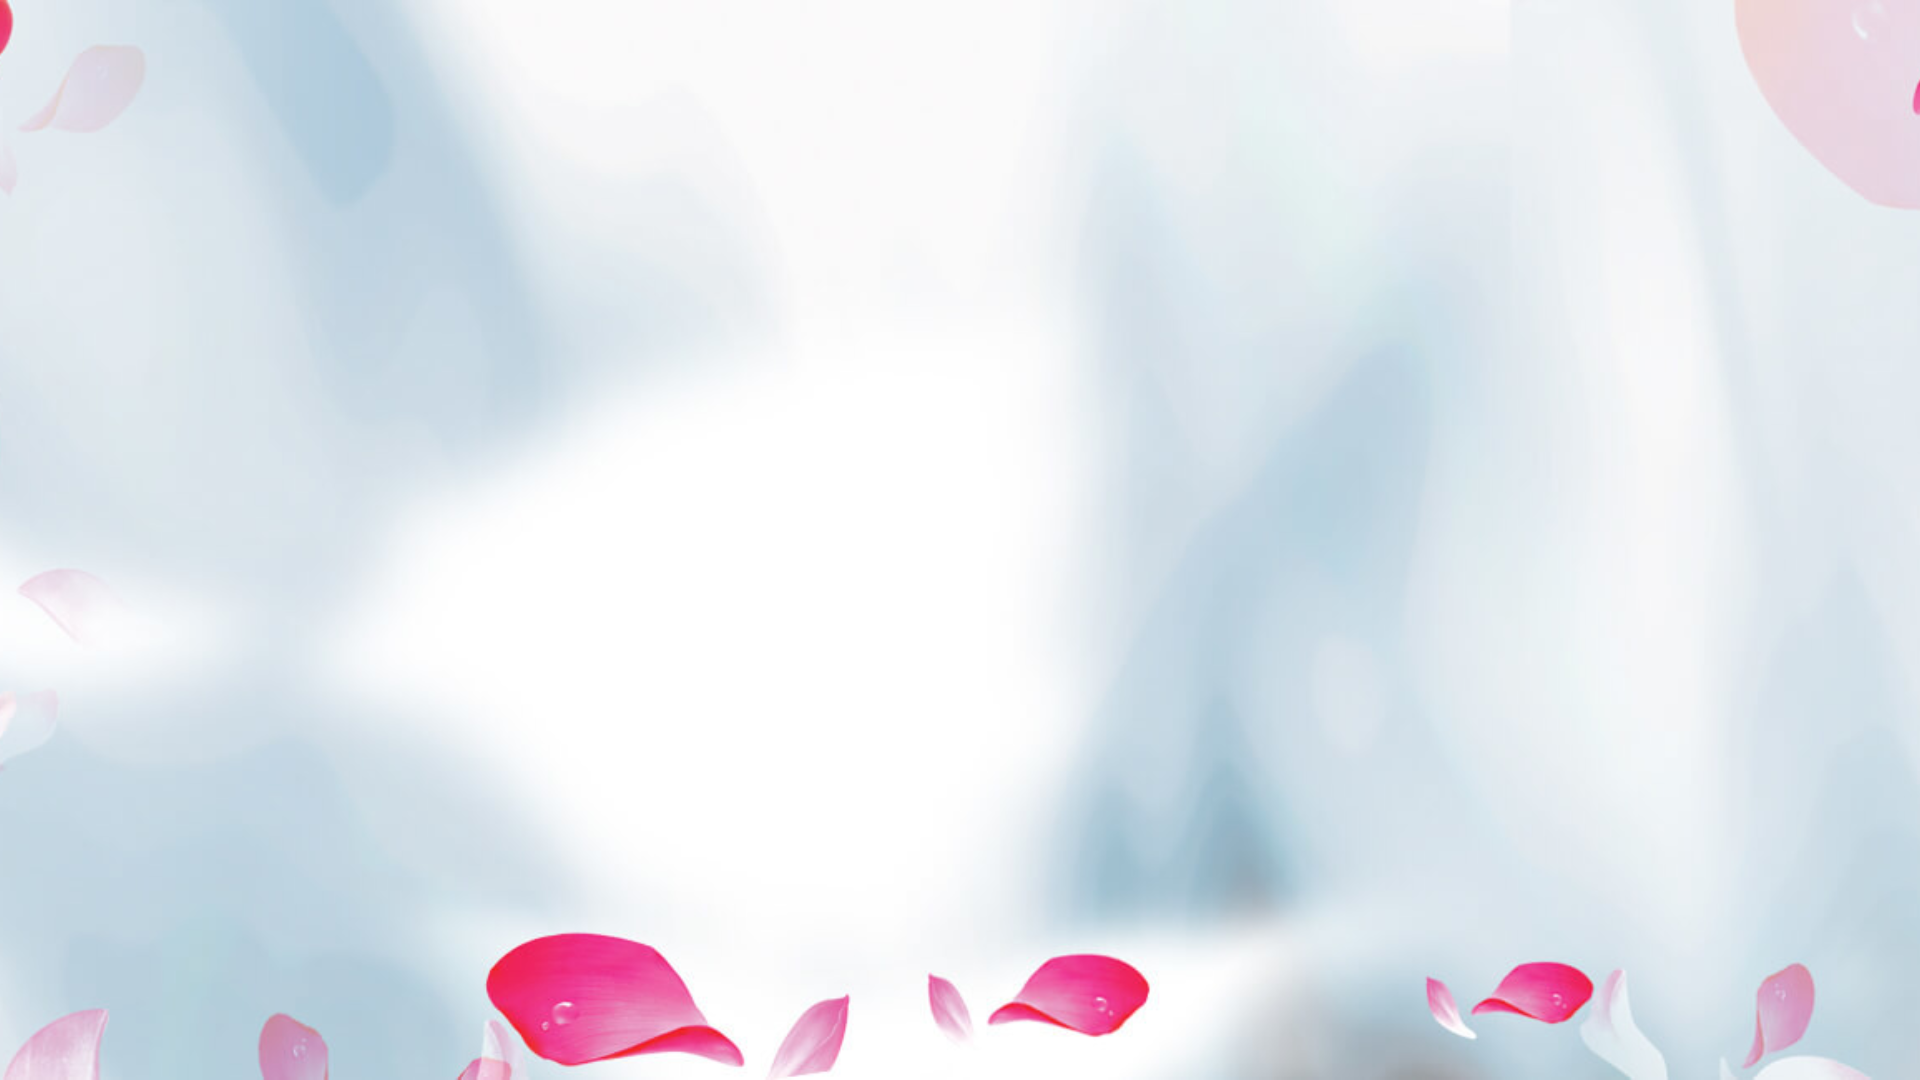 Romantic Background Photos Download Free Romantic Background Stock Photos   HD Images